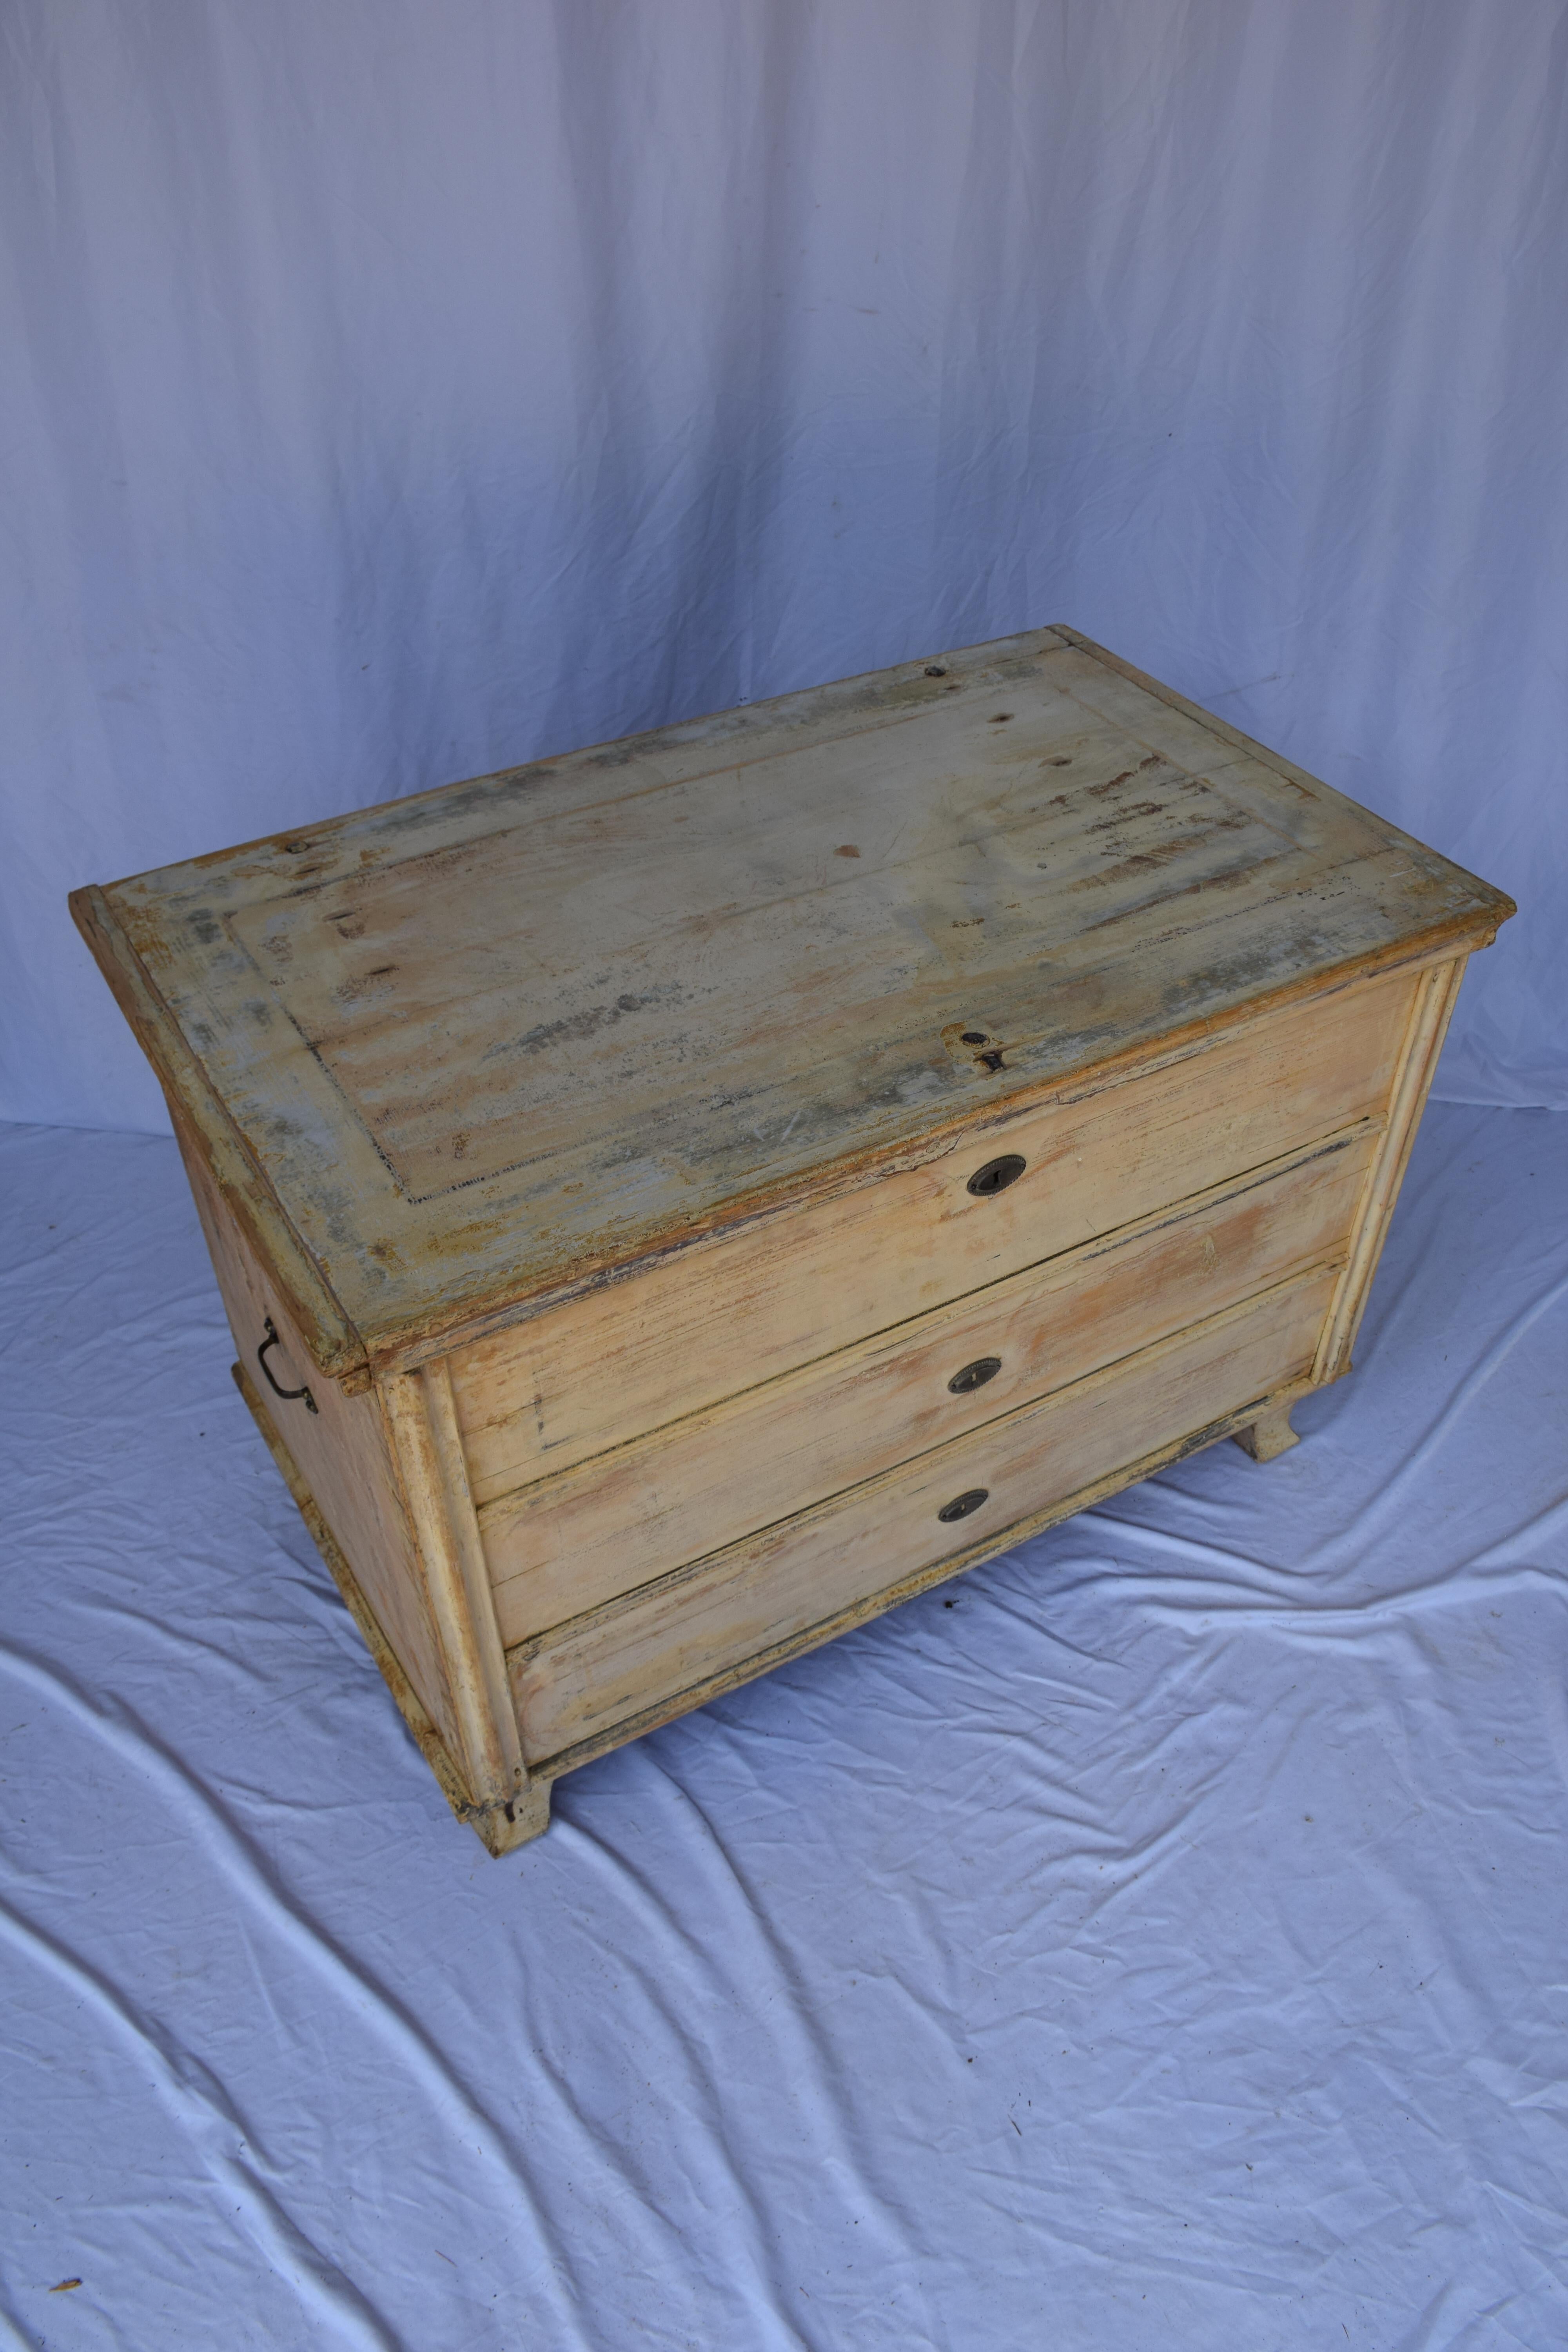 19th Century antique painted flat top trunk. The wrought iron handles on each side make it easy to carry and move about. The flat top makes this trunk ideal to serve as a small coffee or side table table as well. Any nicks, scratches, worn areas of